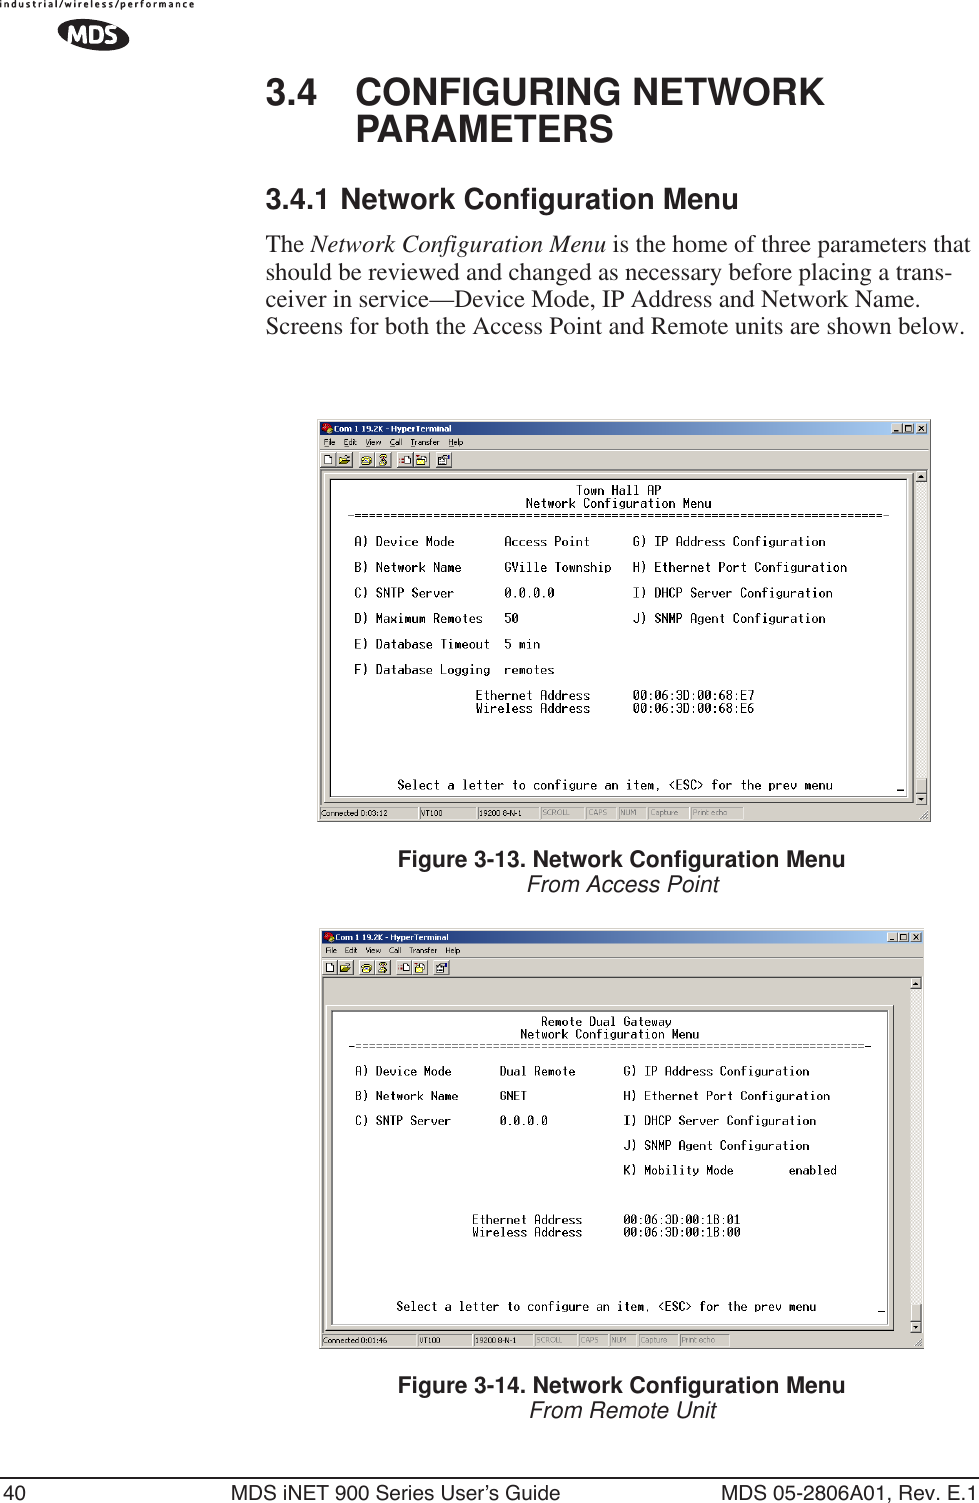 40 MDS iNET 900 Series User’s Guide MDS 05-2806A01, Rev. E.13.4 CONFIGURING NETWORK PARAMETERS3.4.1 Network Configuration MenuThe Network Configuration Menu is the home of three parameters that should be reviewed and changed as necessary before placing a trans-ceiver in service—Device Mode, IP Address and Network Name. Screens for both the Access Point and Remote units are shown below.Figure 3-13. Network Configuration MenuFrom Access PointFigure 3-14. Network Configuration MenuFrom Remote Unit